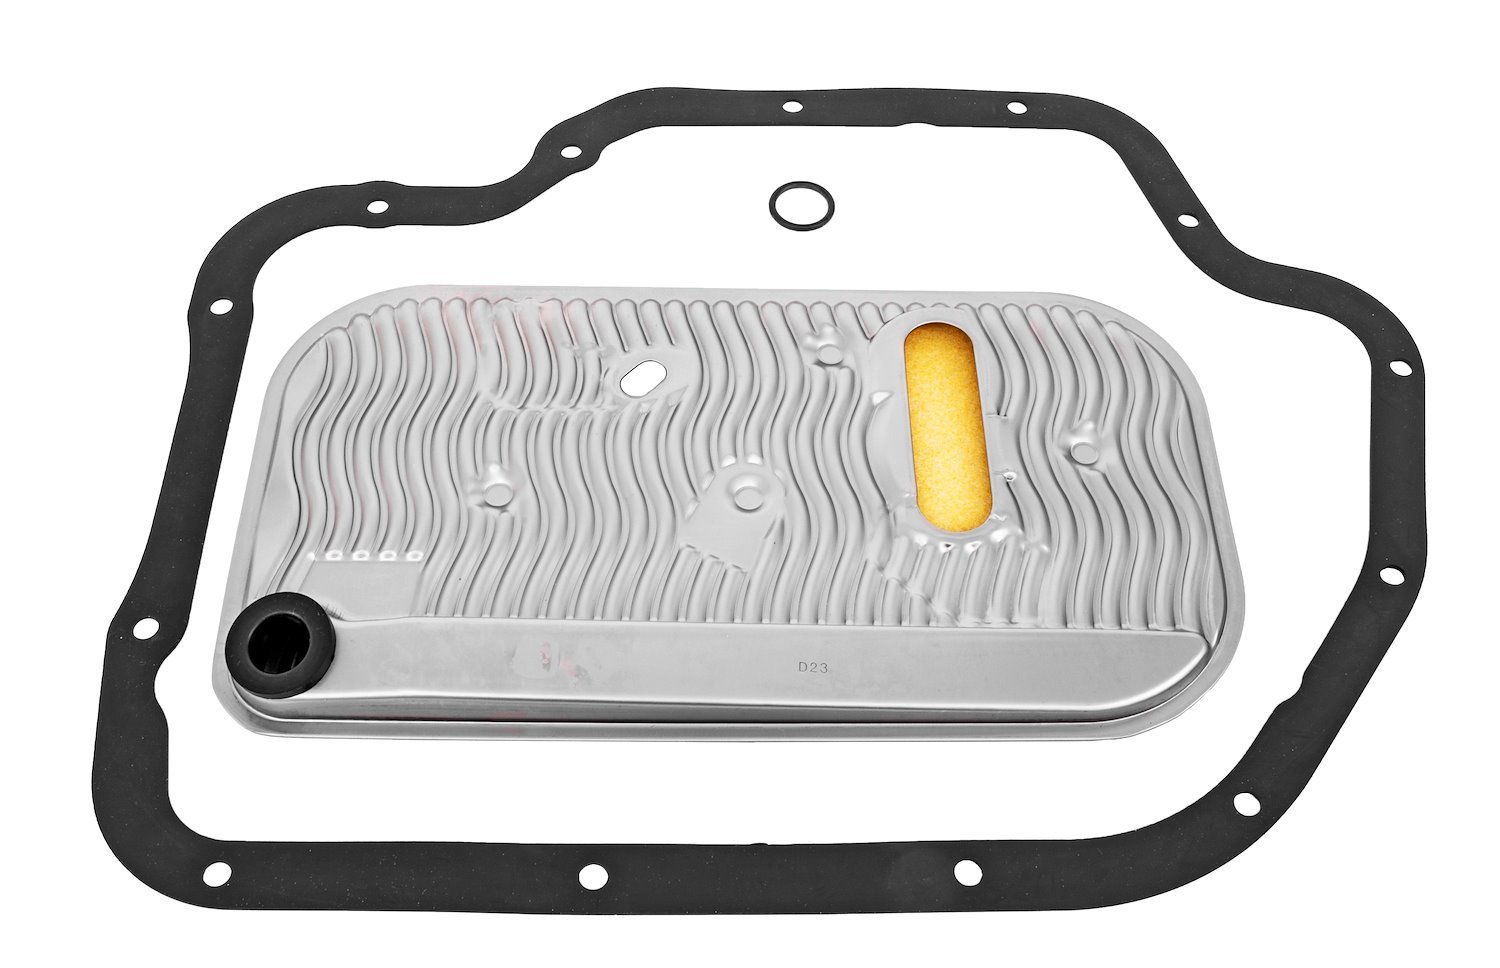 Transmission Filter and Gasket Kit for TH400 Chevy, BOP